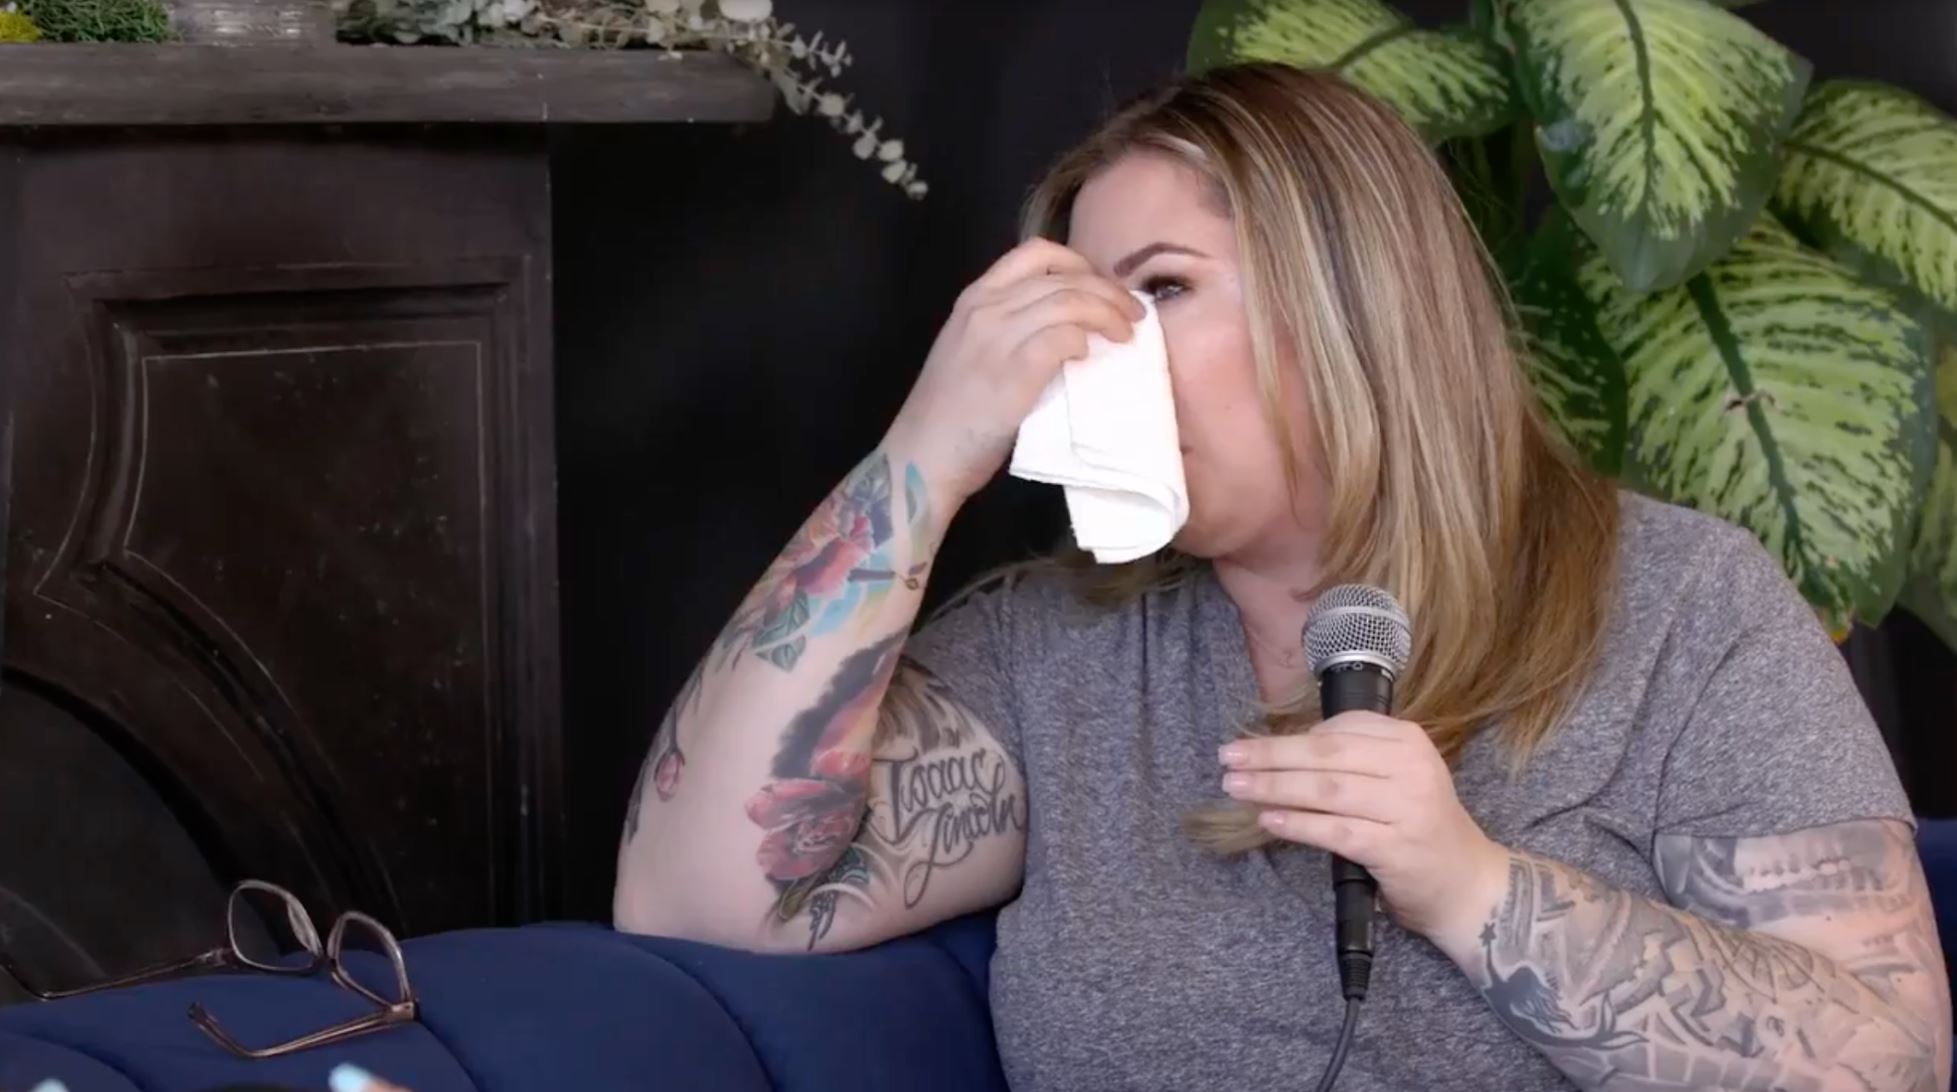 Kailyn recently opened up about her twins' terrifying birth and the weeks after where they stayed in the hospital